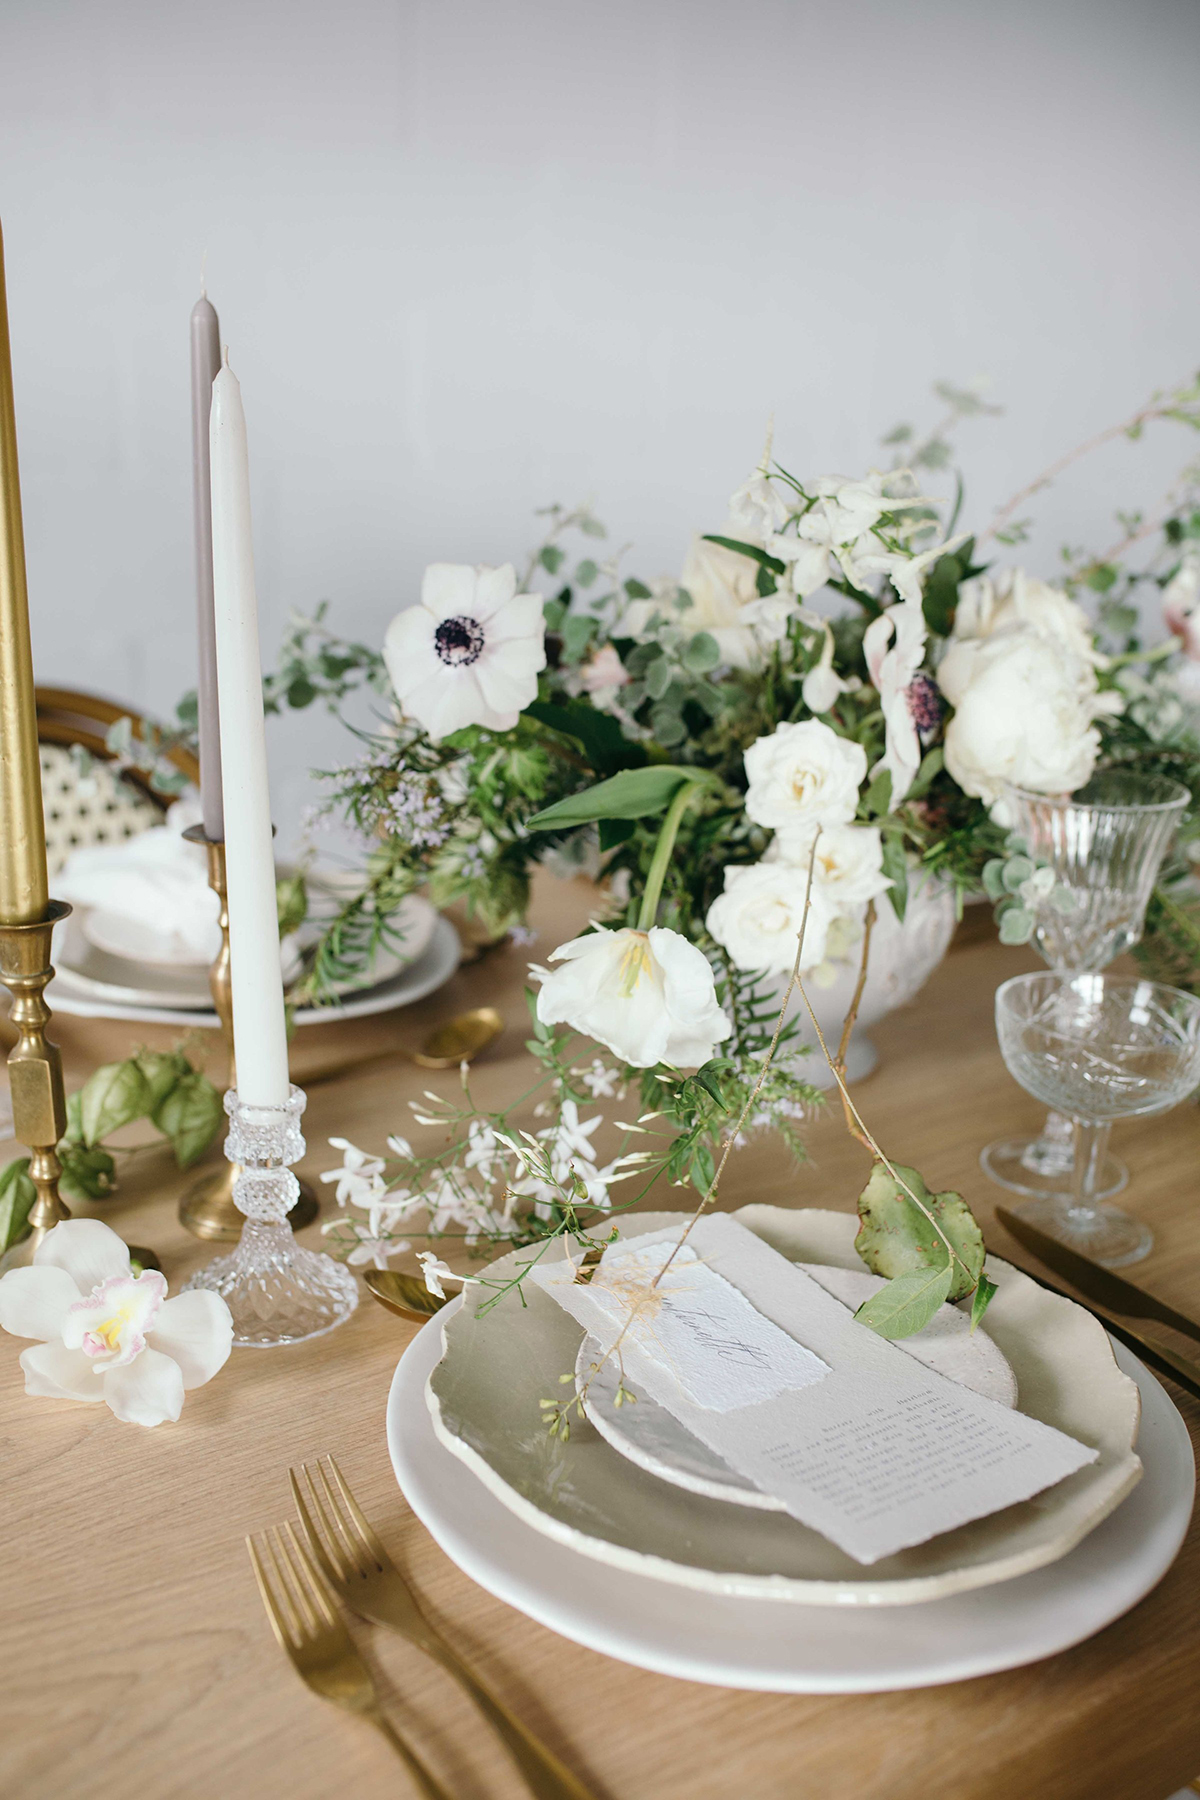 pressed glass and stone soft wedding colour palette pressed glass candlesticks available from The Wedding of my Dreams